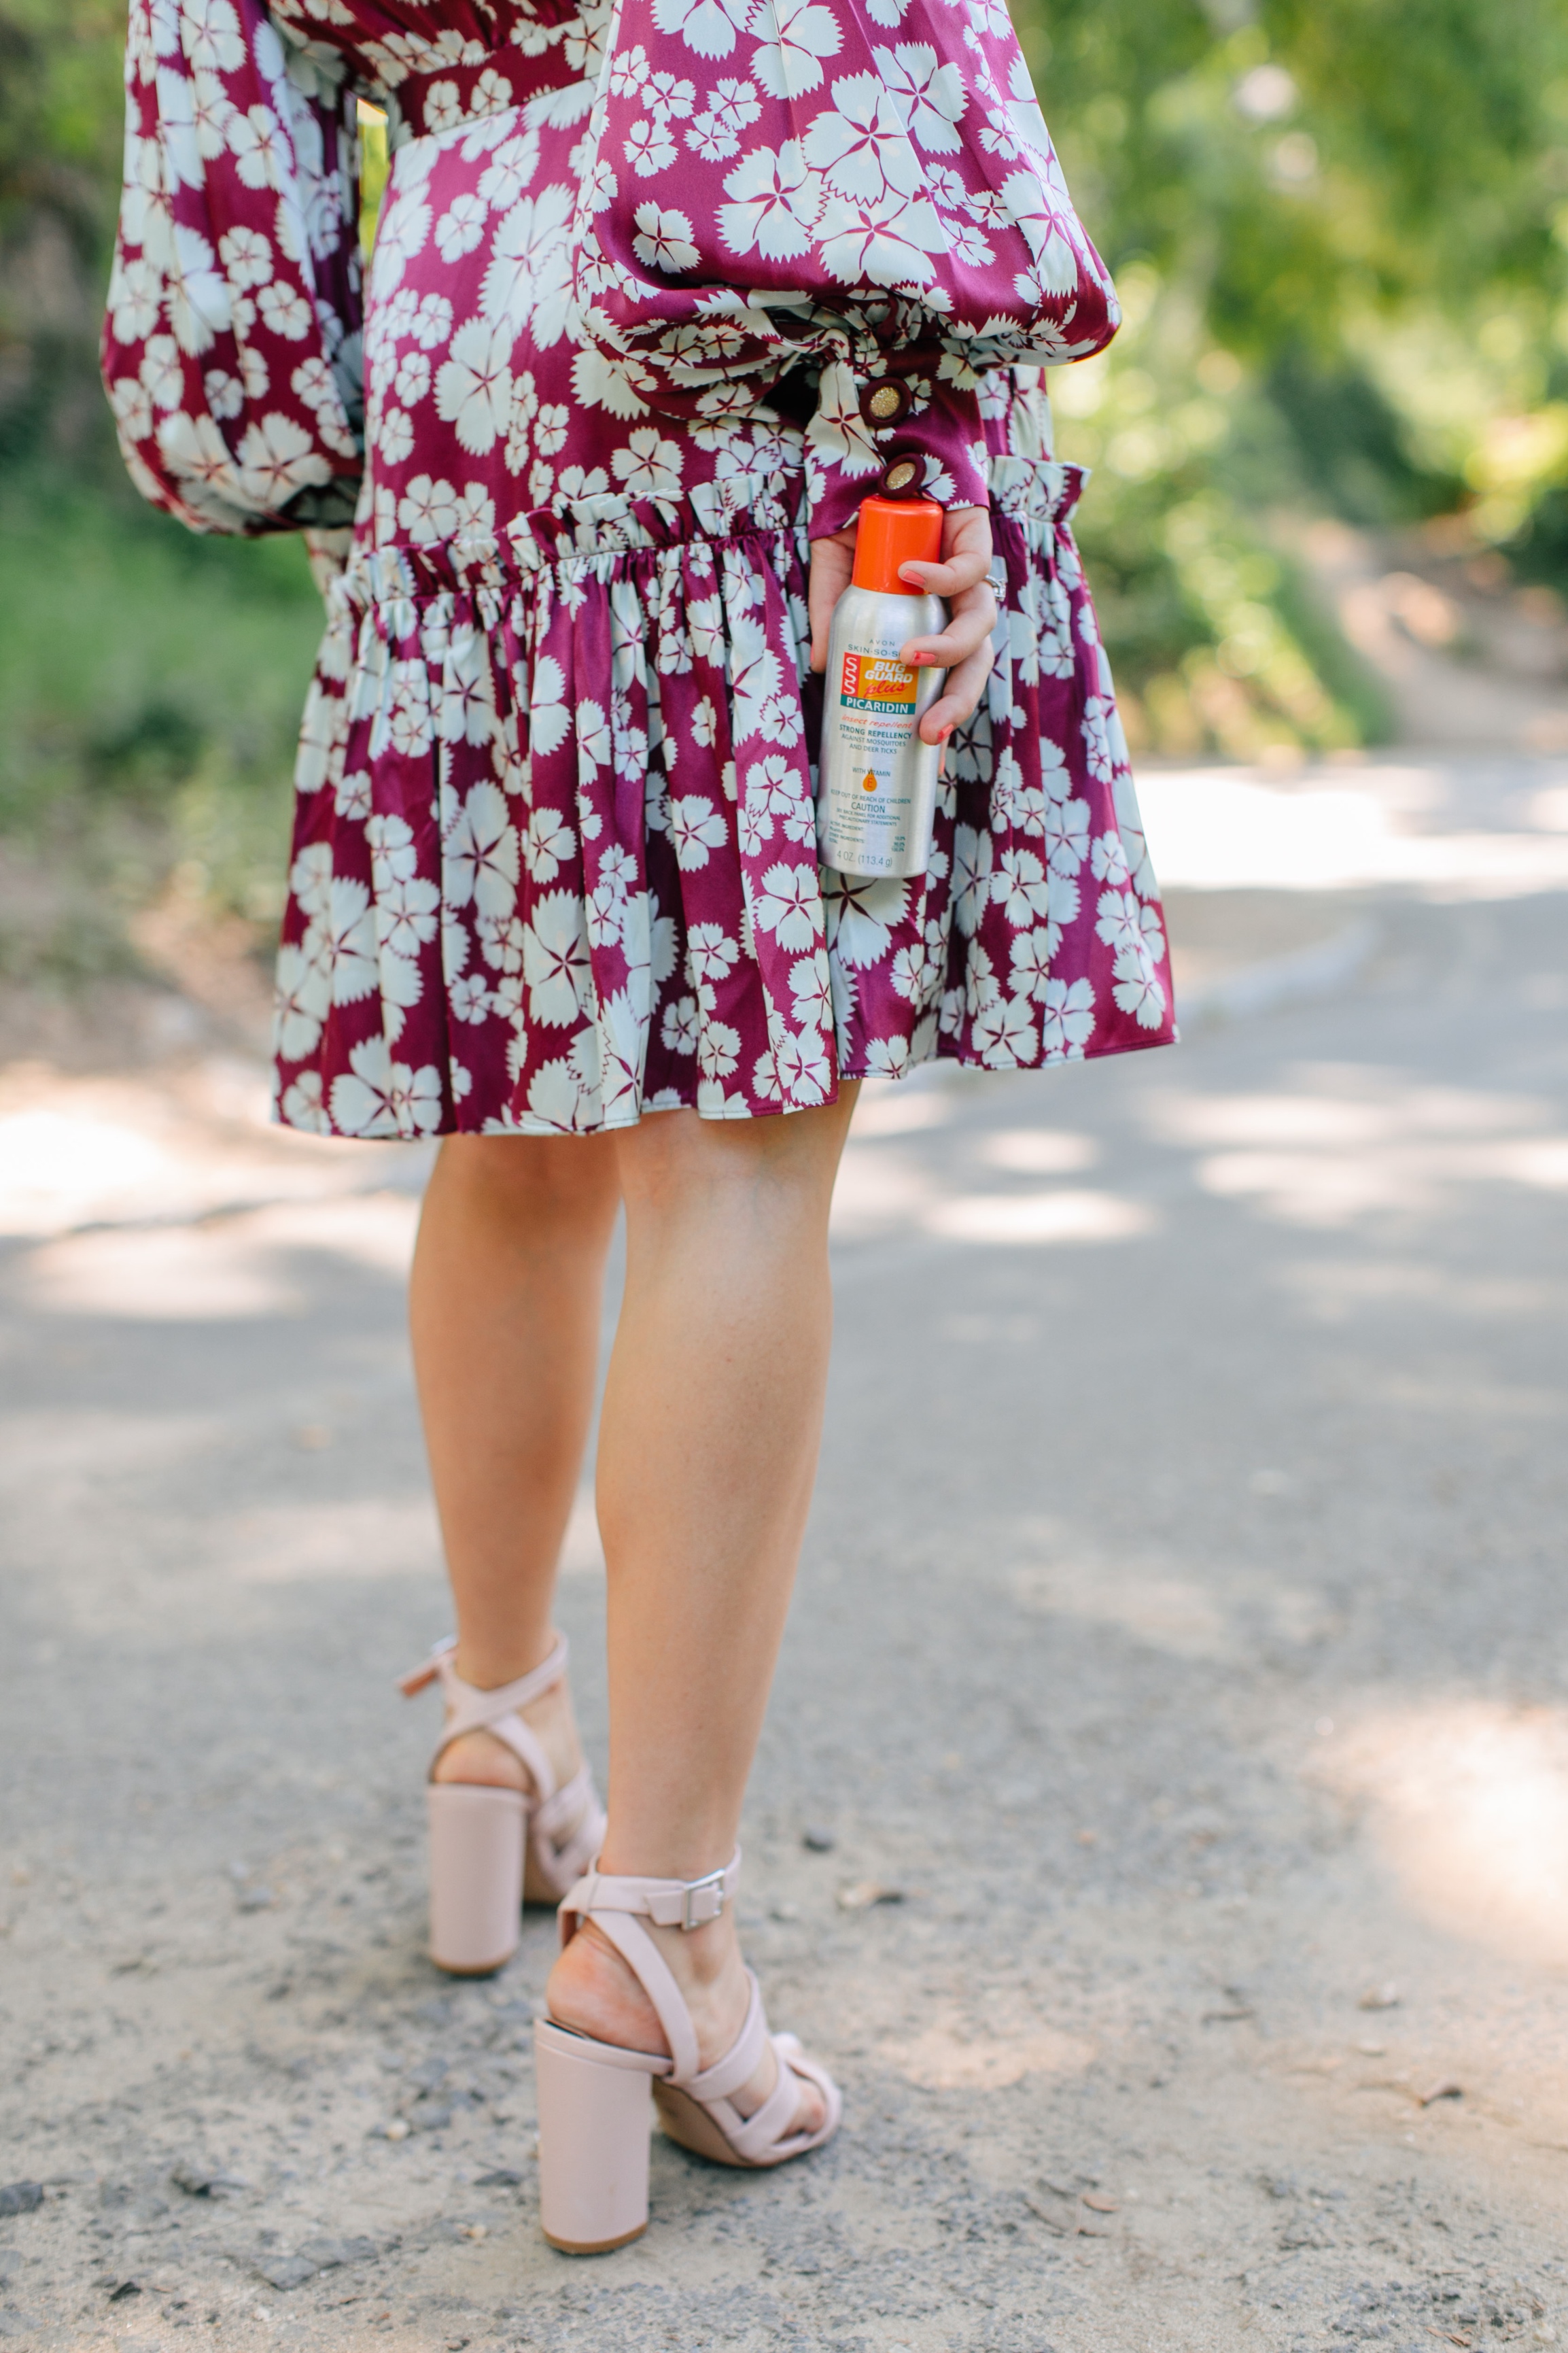 Bring On The Bug Spray Avon Bug Guard Esther Santer NYC Street Style Blogger Outdoors Adventure Explore Upstate New York Central Park Printed Dress Designer Product Review Button Front Photoshoot Brand Collab  Beauty Skincare Cold Shoulder Circle Bag.jpg